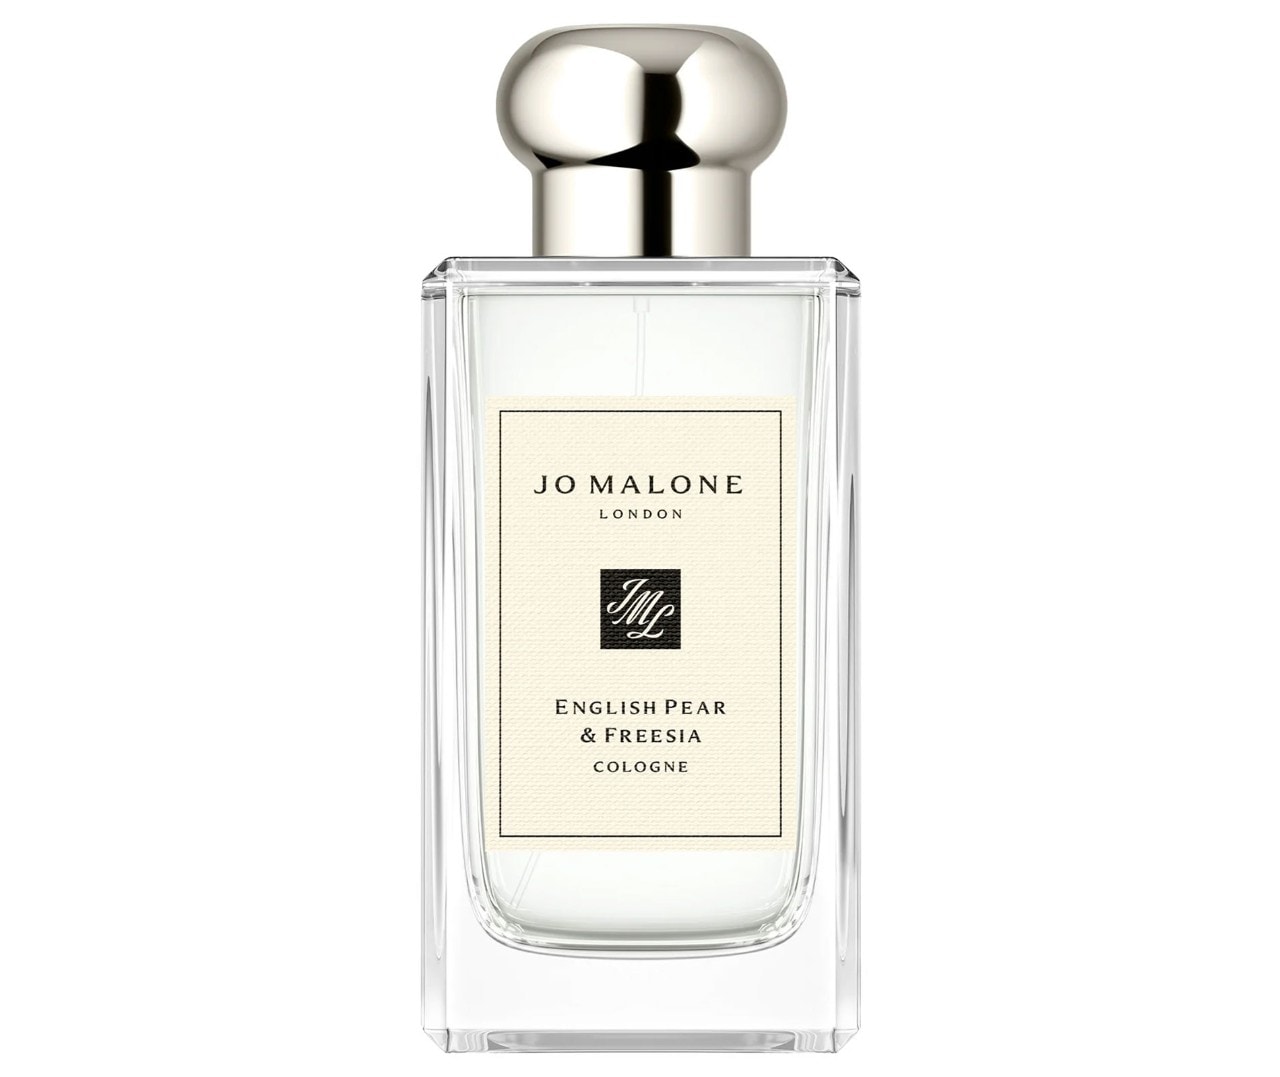 A bottle of Jo Malone English Pear and Freesia cologne